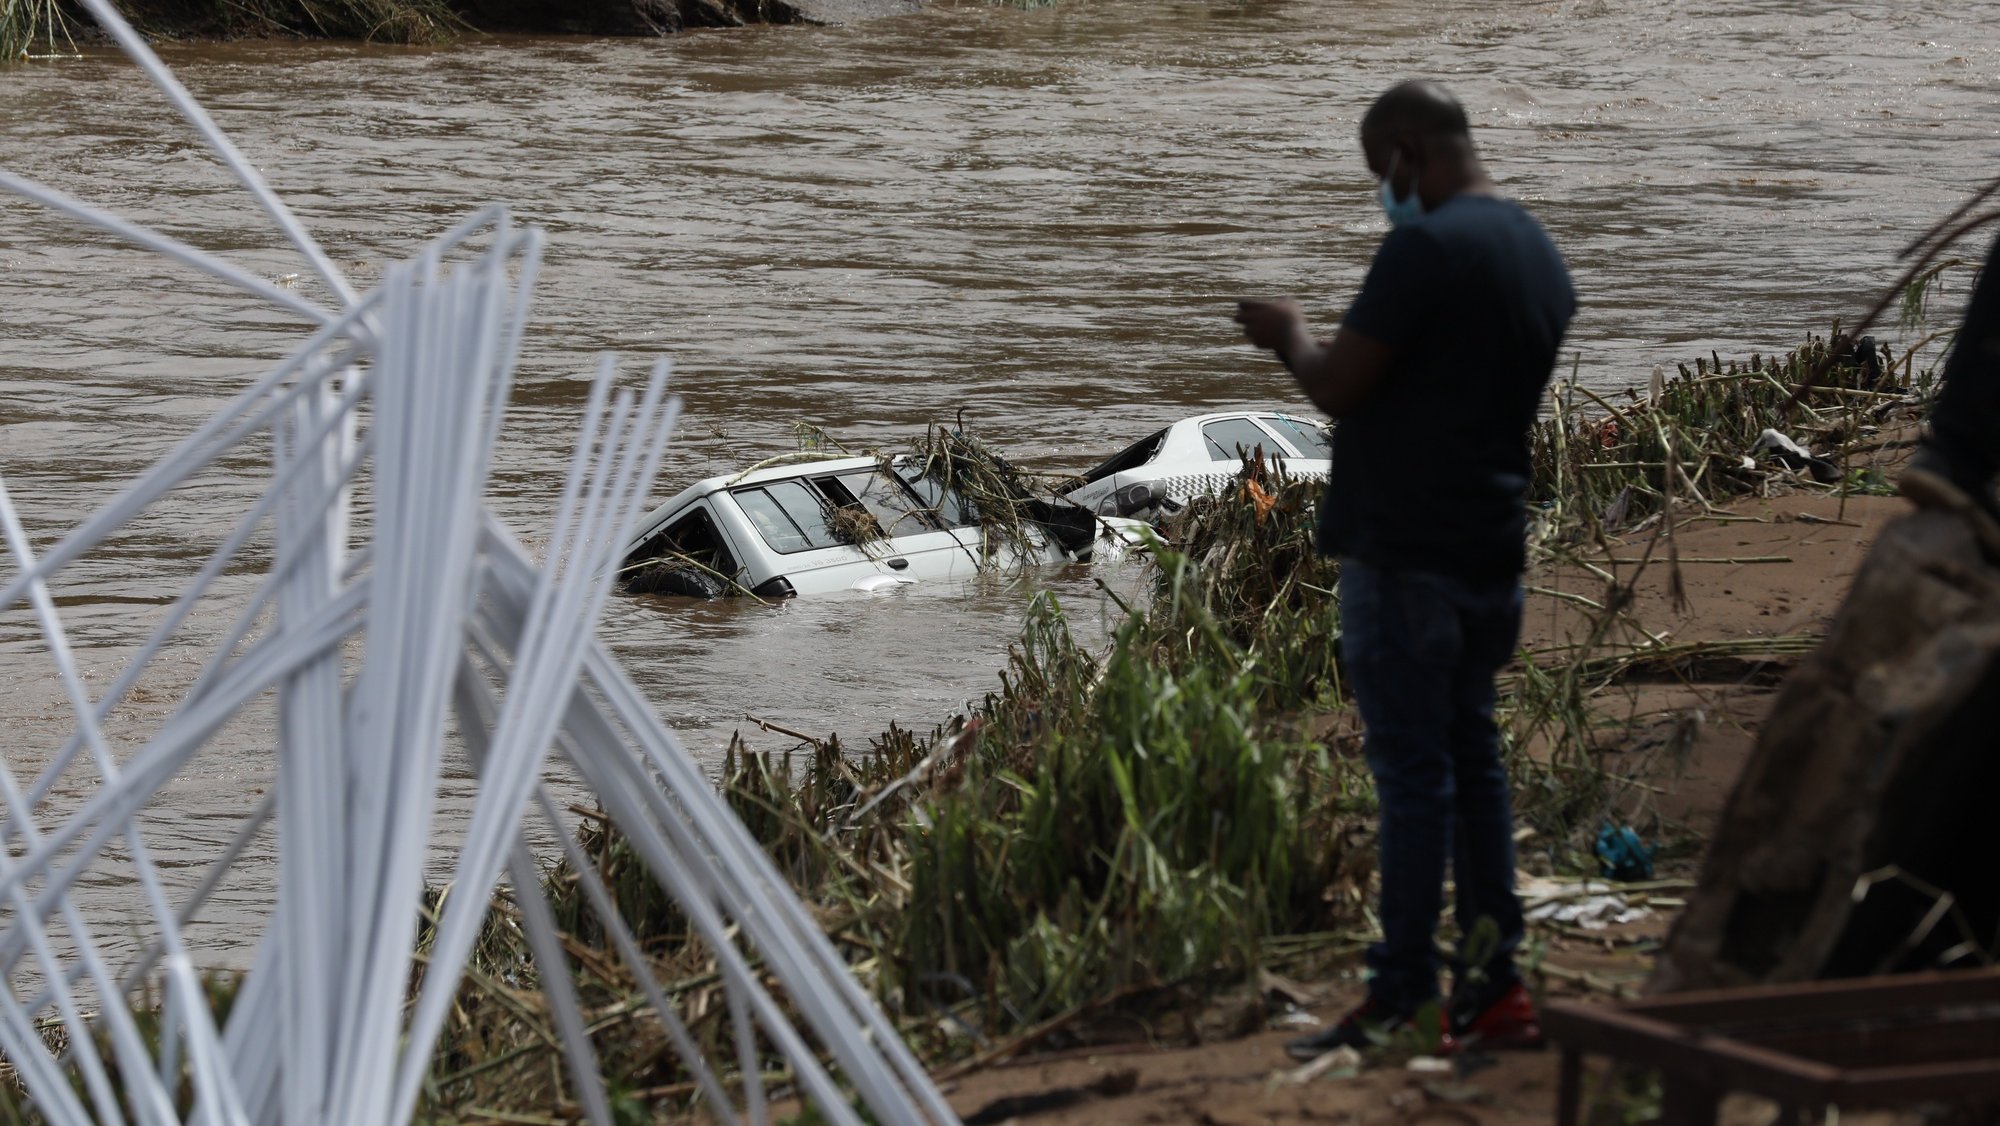 epa09886248 Two cars are submerged in flood waters near Durban, South Africa, 12 April 2022. At least 45 people have died as a result of heavy flooding in the Eastern Coastal area. Key roads in the area have been damaged and as mudslides destroyed houses. The South African National Defense Force have been called in to assist.  EPA/STR